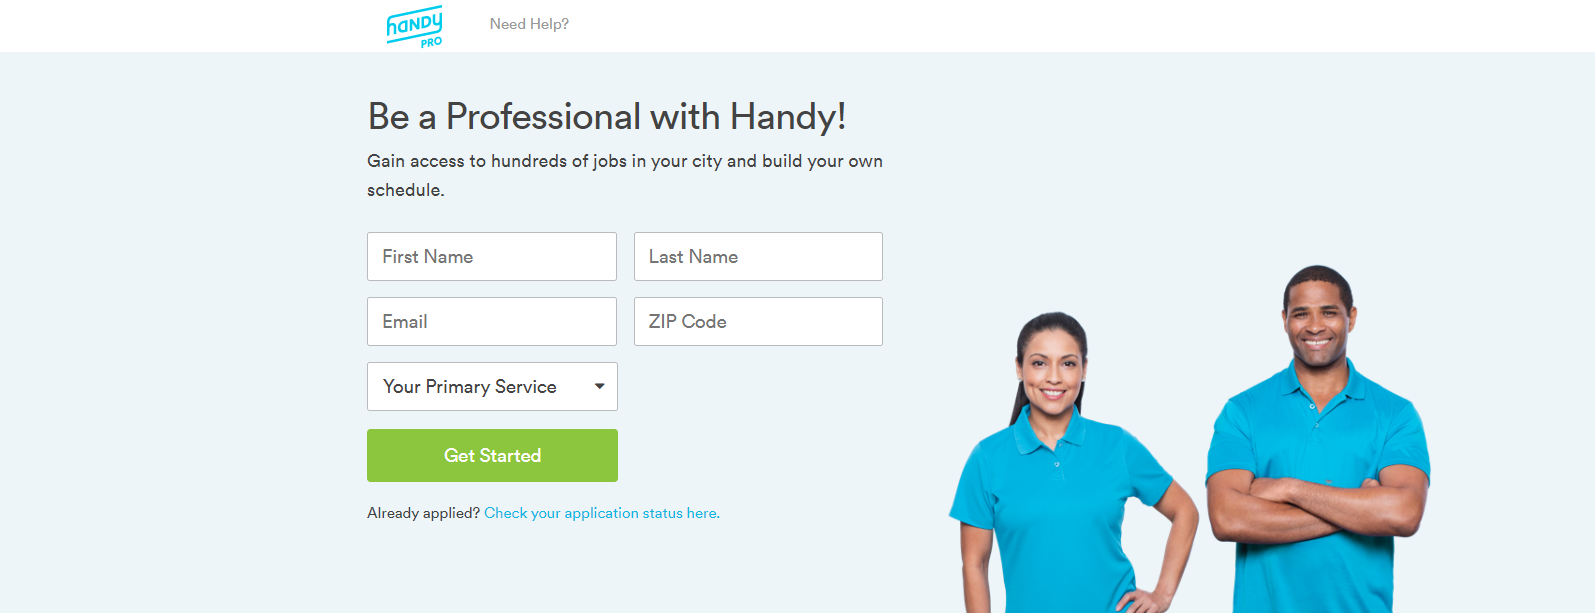 Handy-Pro-Signup